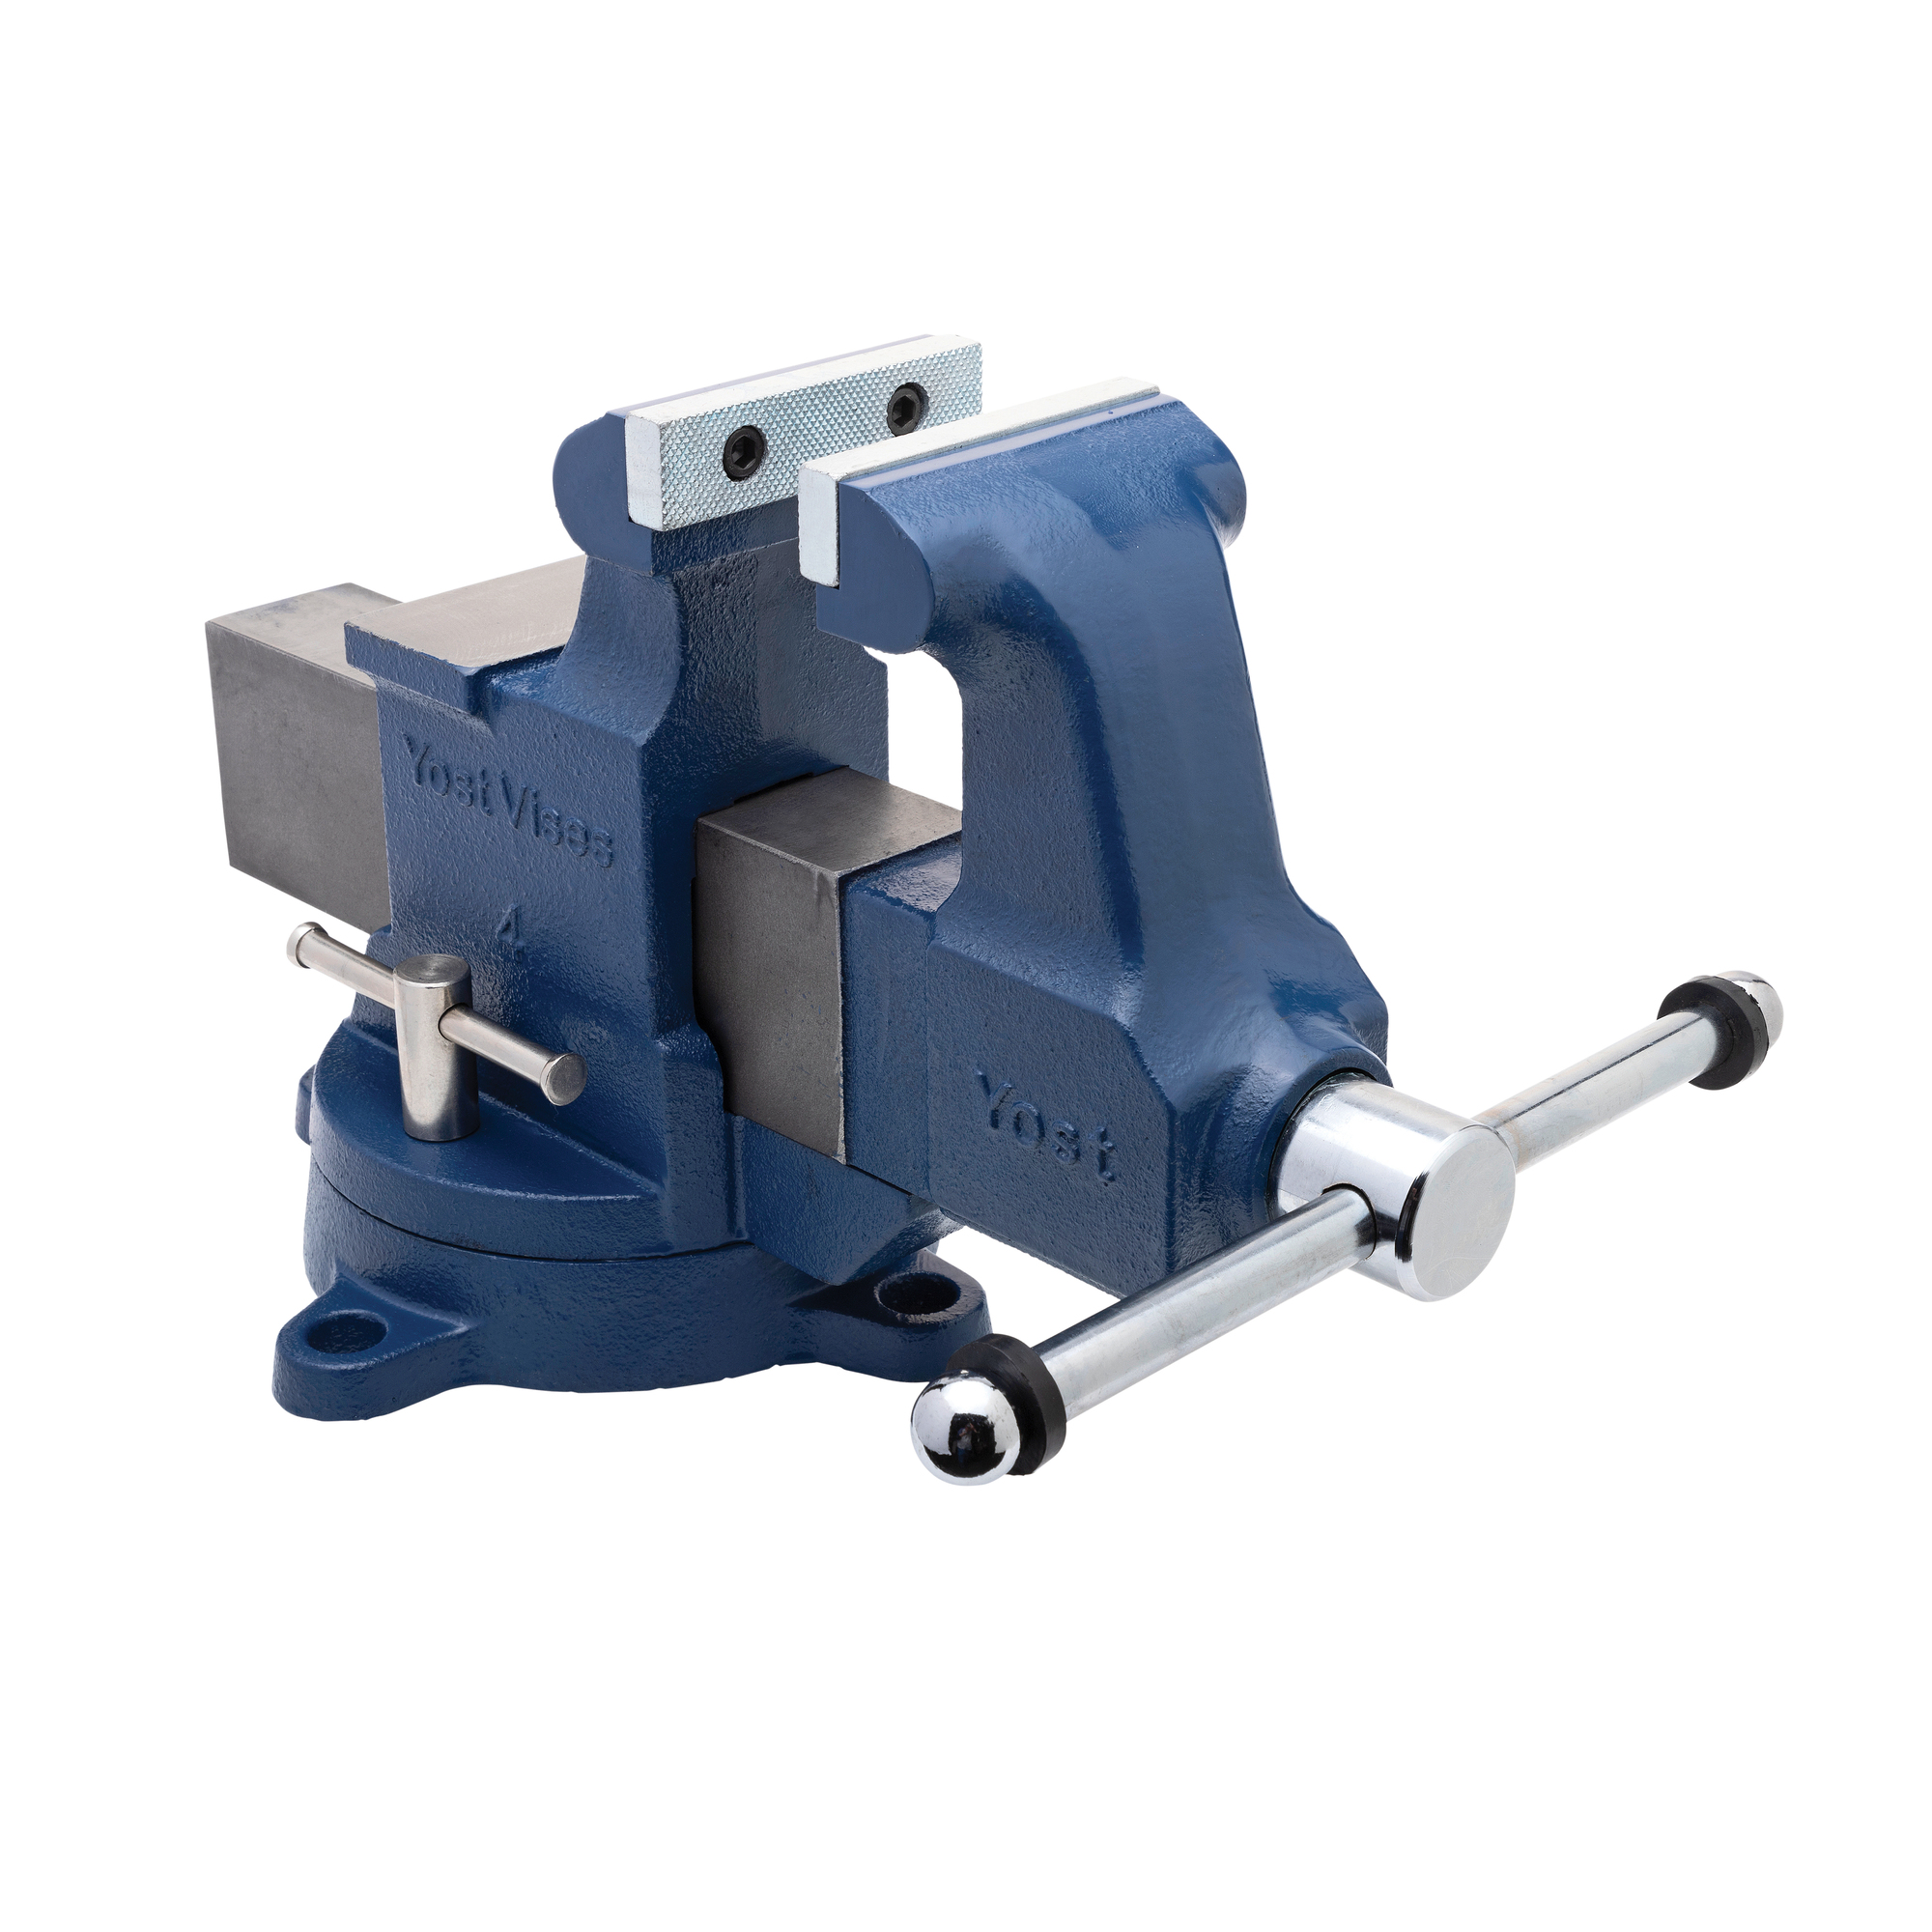 Yost Vises, 4Inch HD Vise Swivel Base, Jaw Width 4 in, Jaw Capacity 0 in, Material Ductile Iron, Model 204